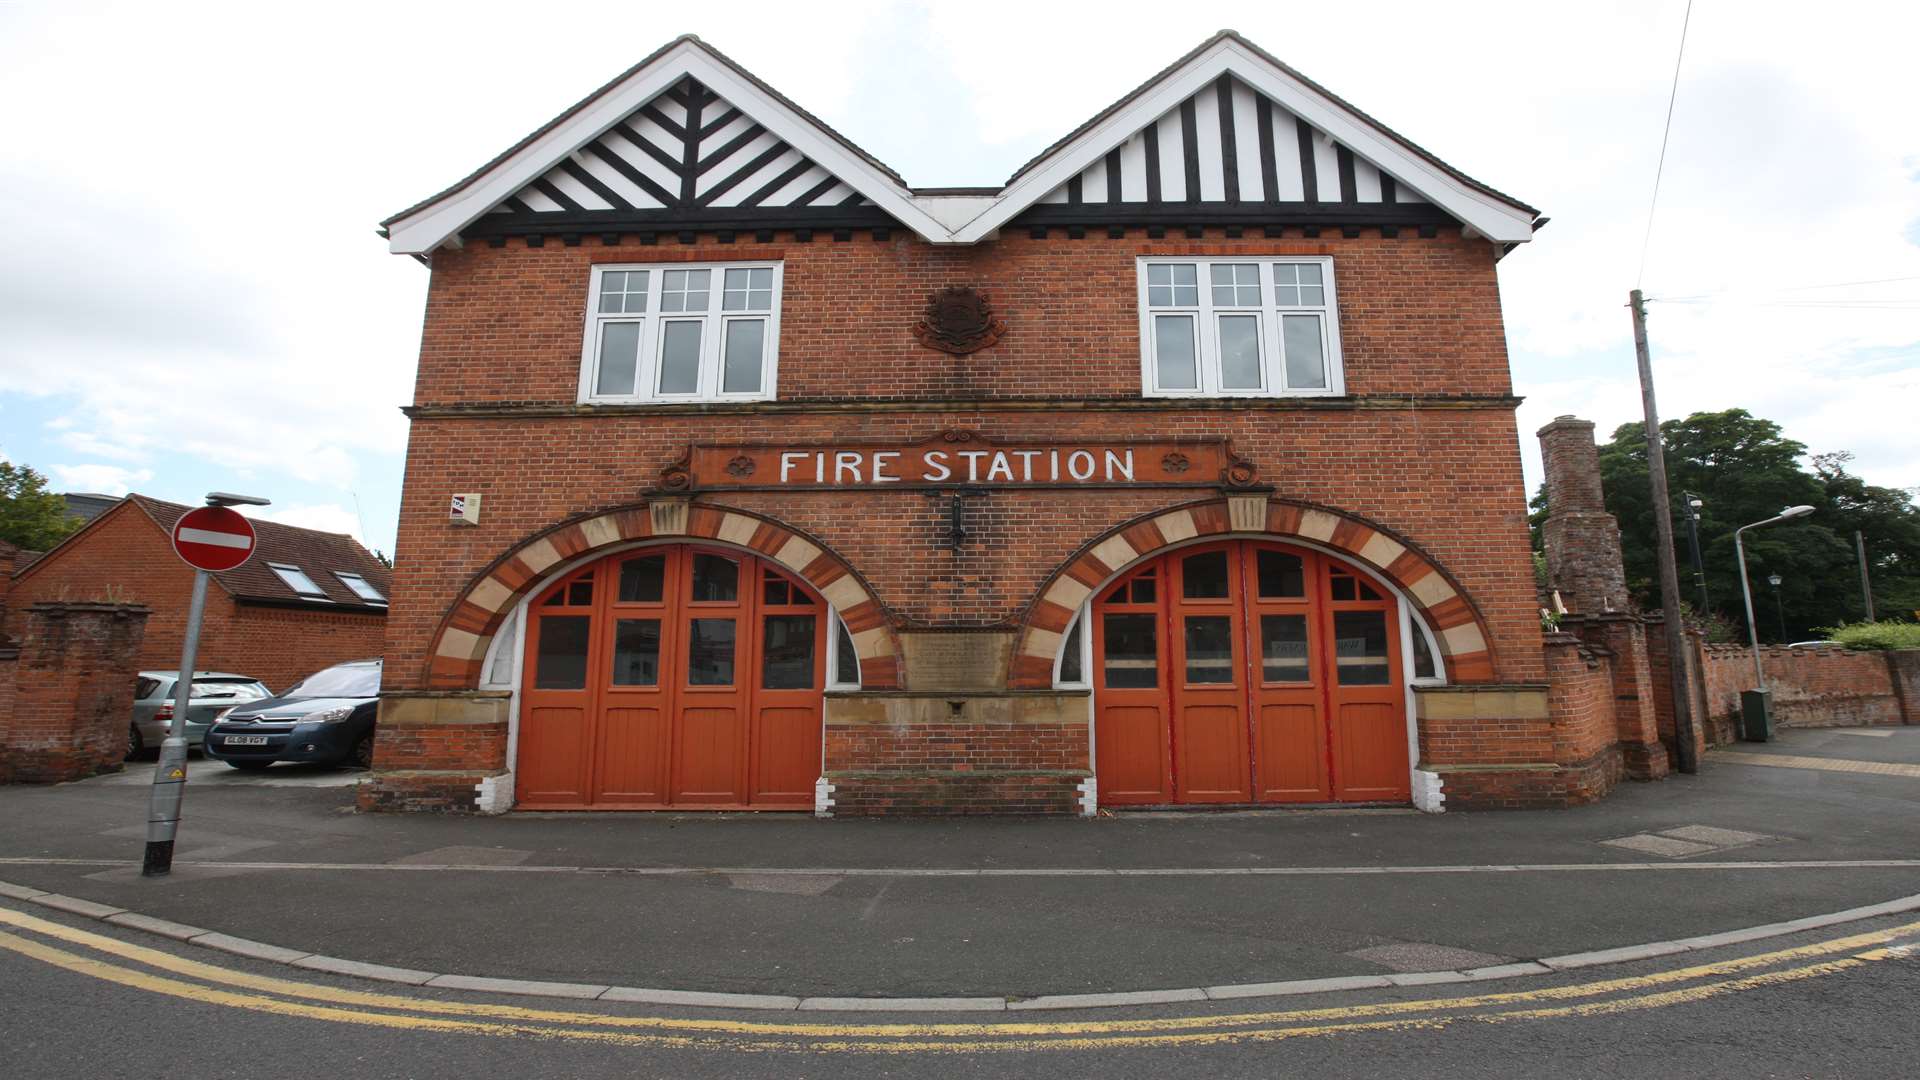 The Old Fire Station in Tonbridge